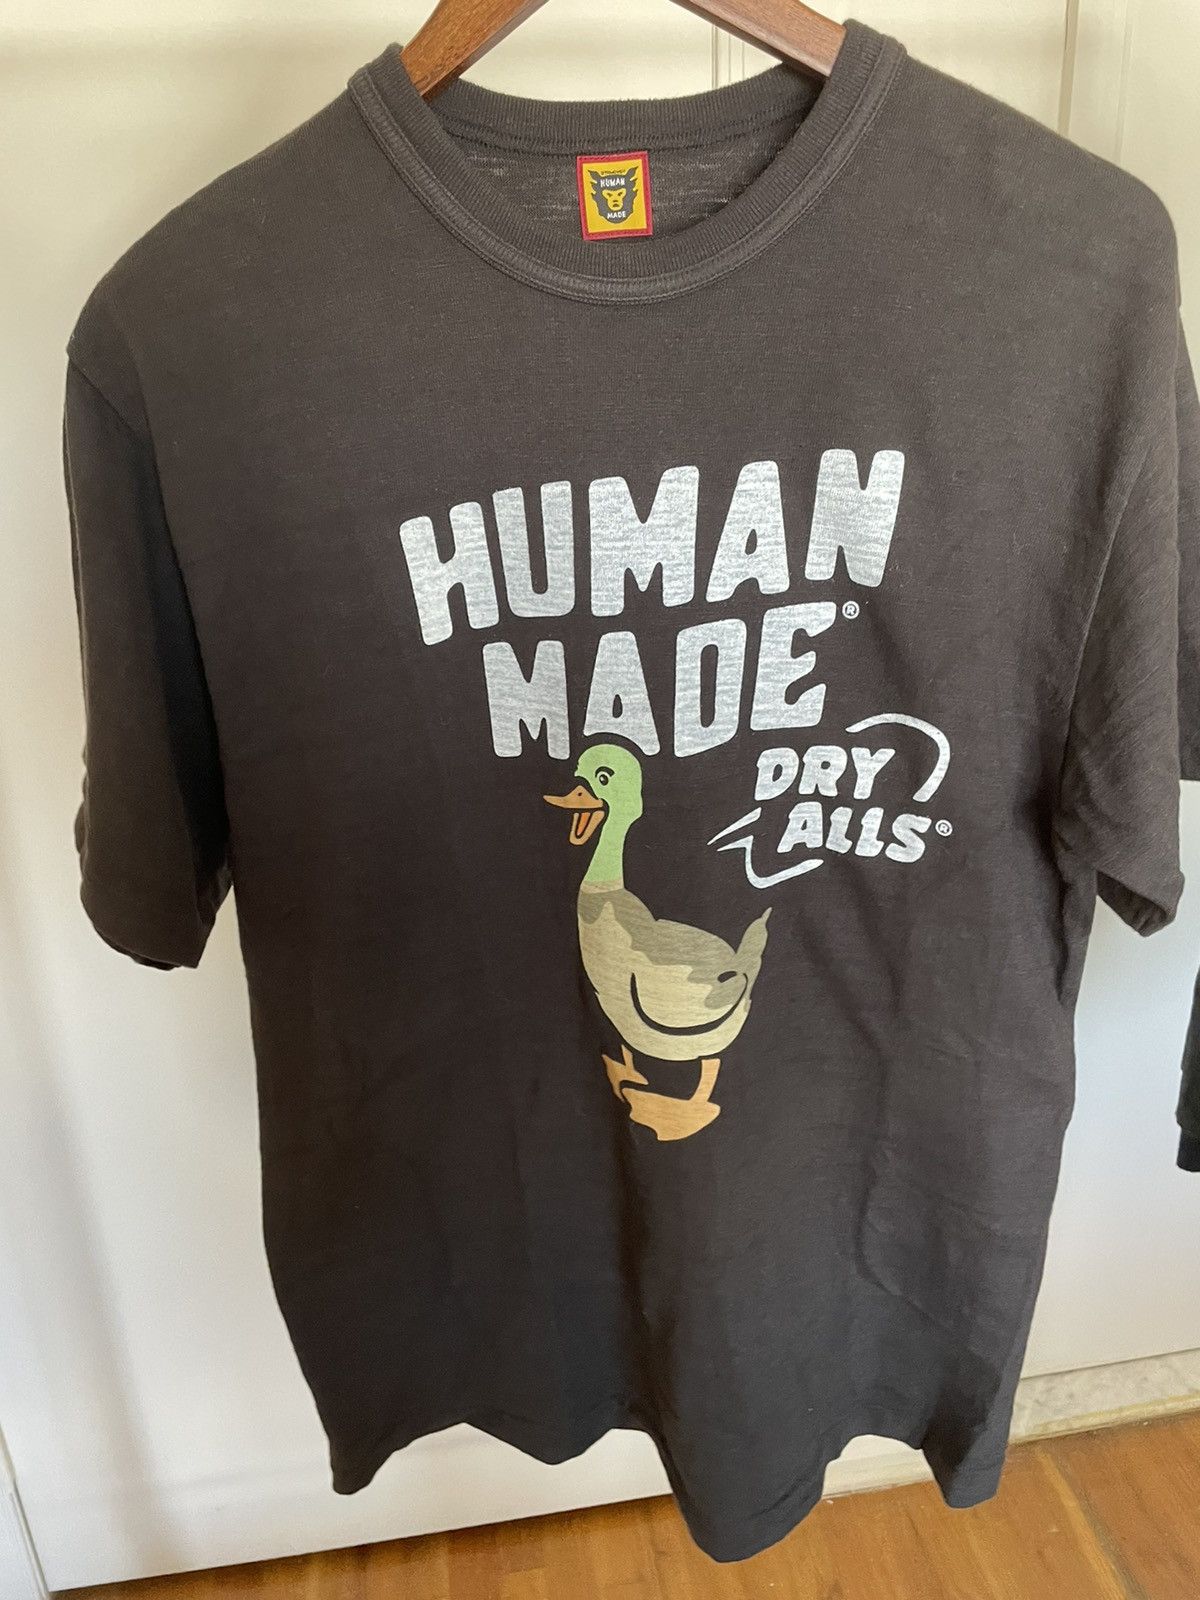 Human Made Dry Alls Duck Tee | Grailed